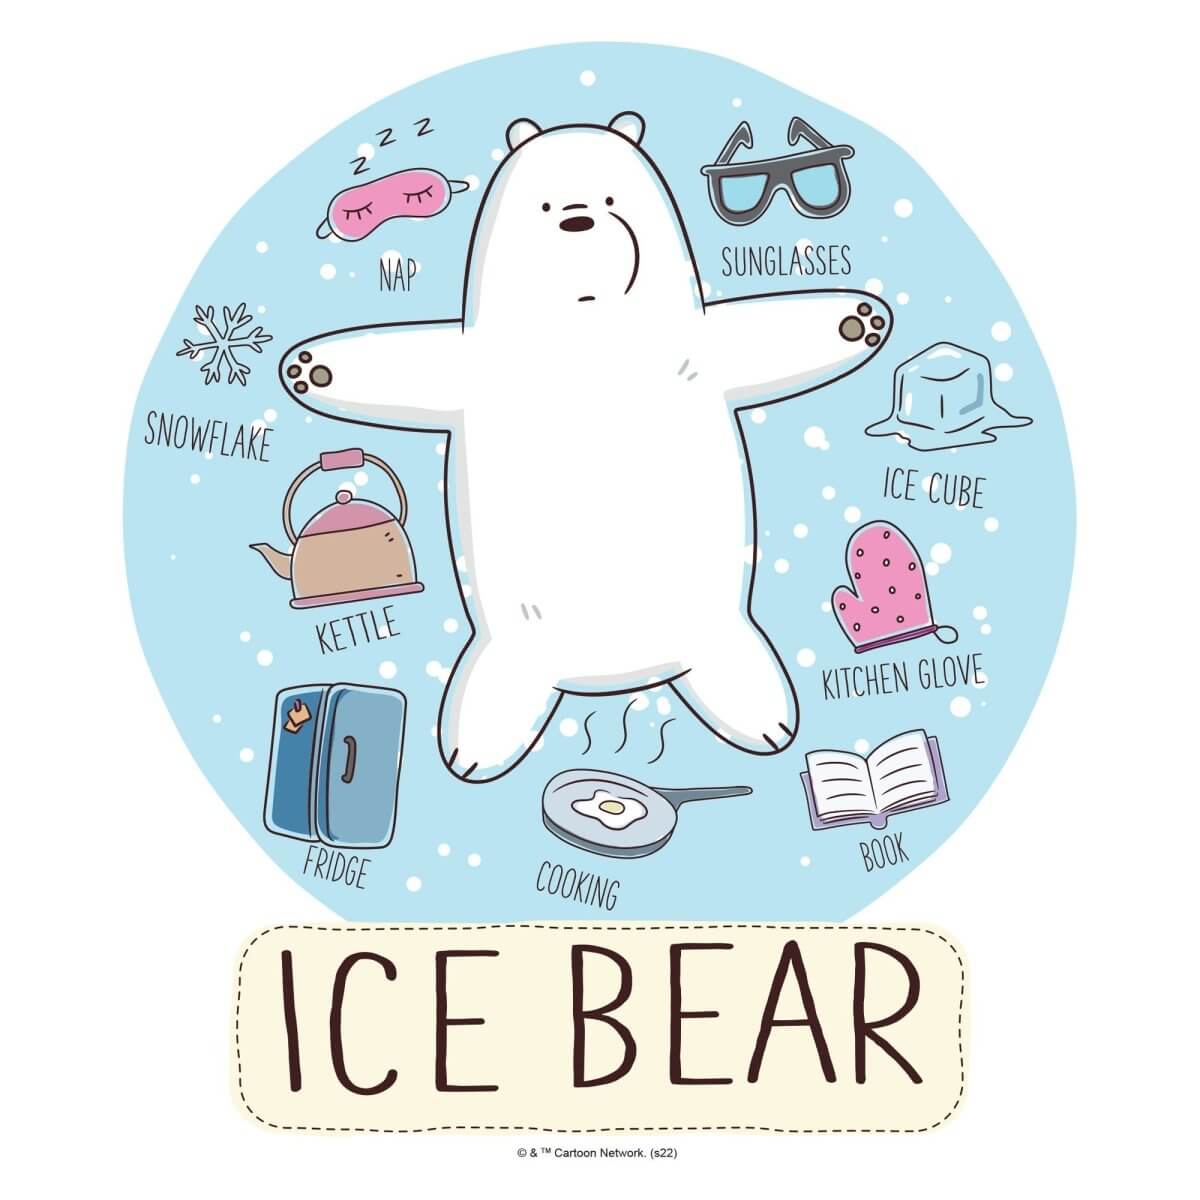 Kismet Decals Home & Room Decor We Bare Bears Ice Bear's Favorites Wall decal sticker - officially licensed - latex printed with no solvent odor - Kismet Decals